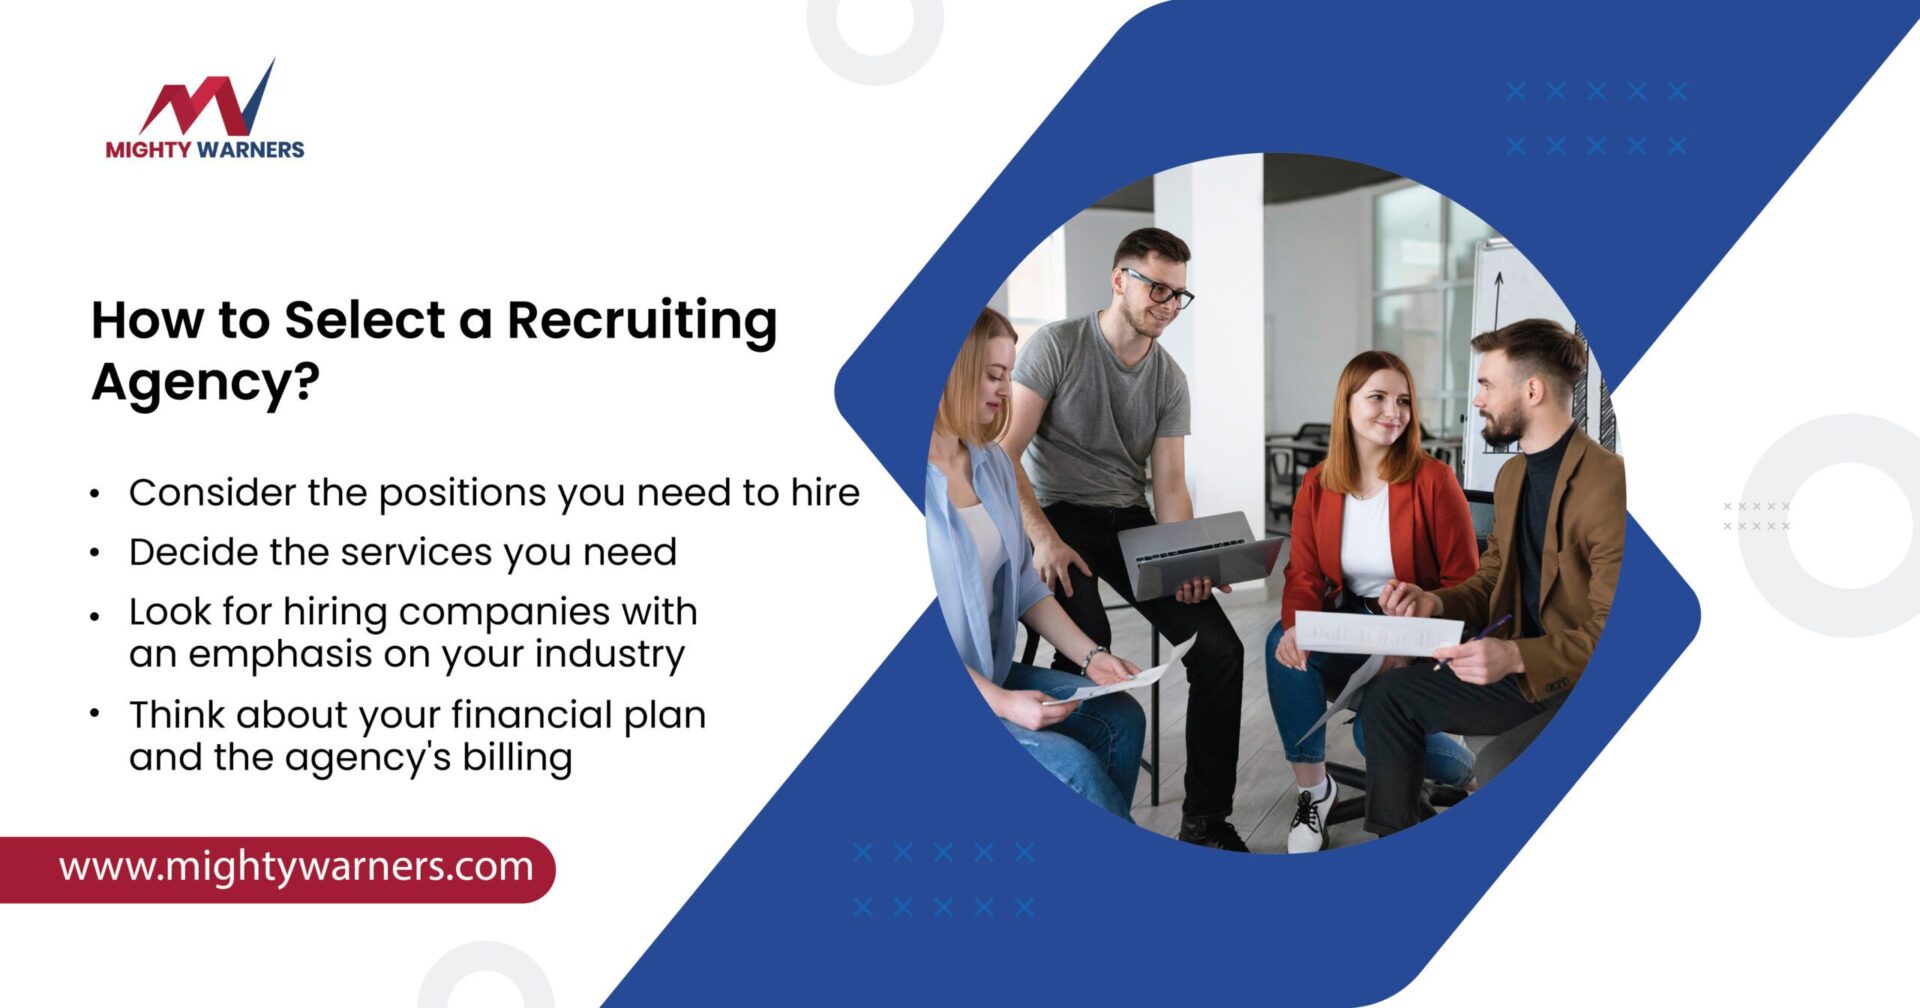 How to Select a Recruiting Agency